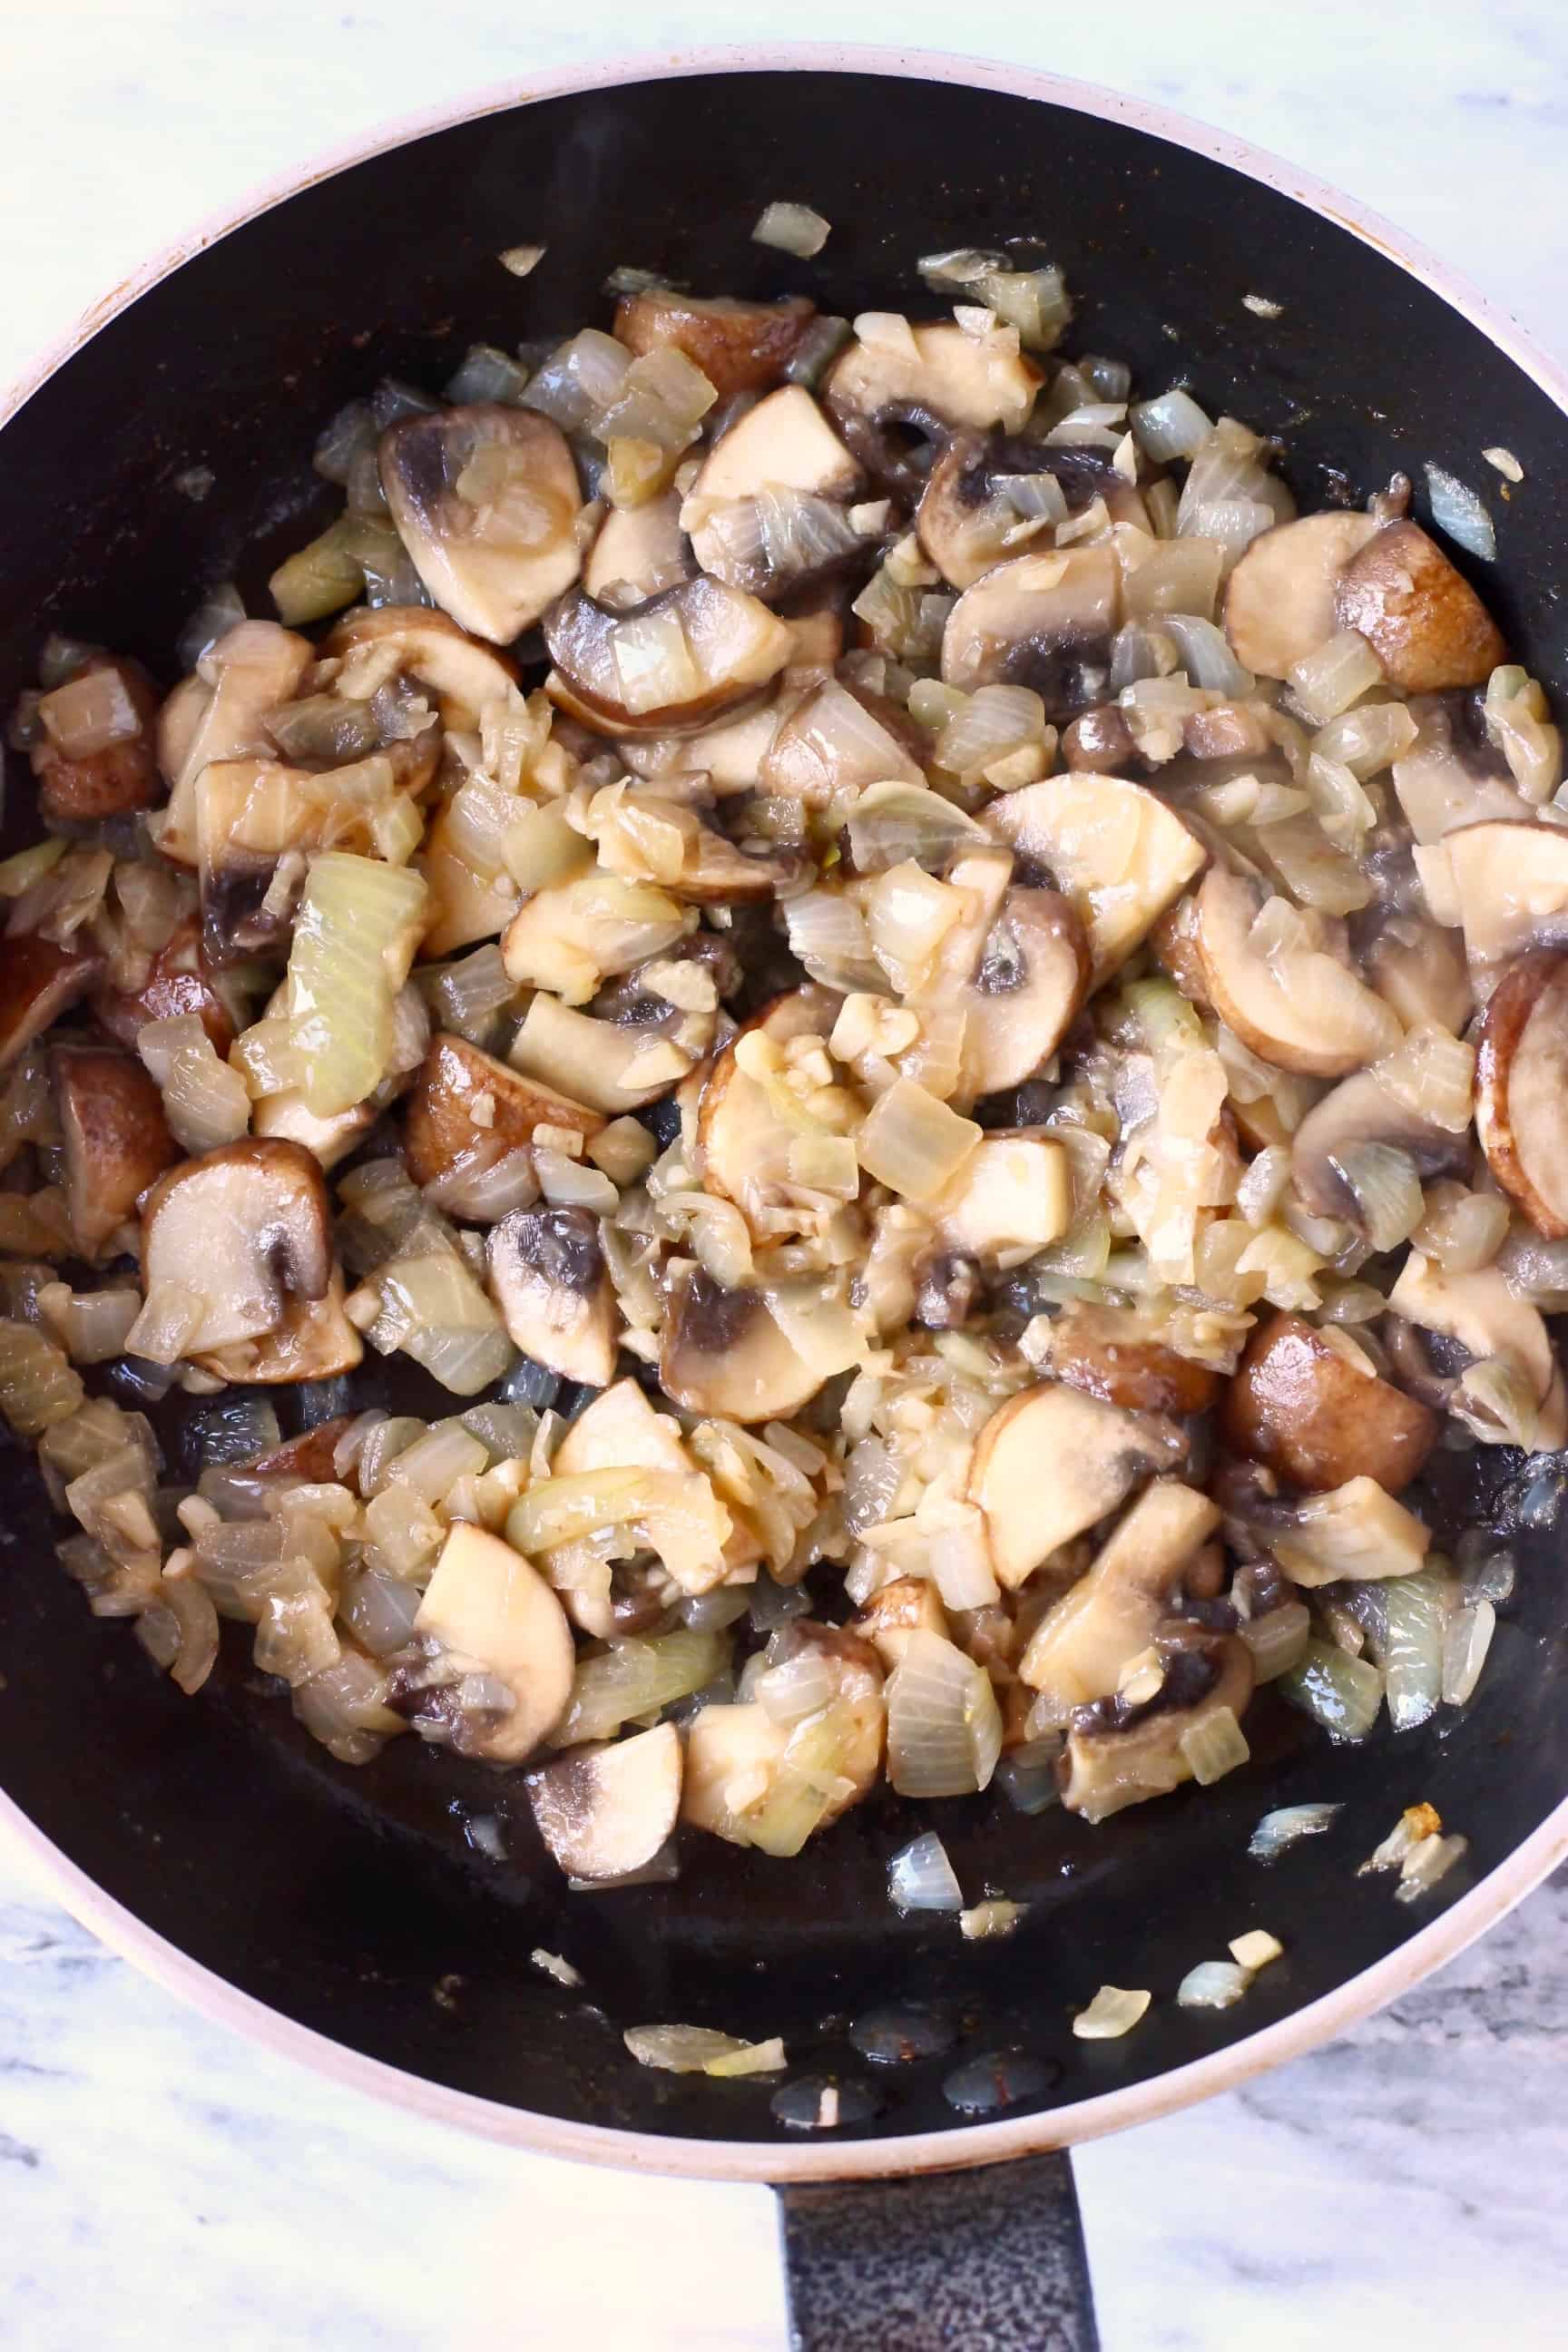 Diced onion and sliced mushrooms being fried in a black frying pan